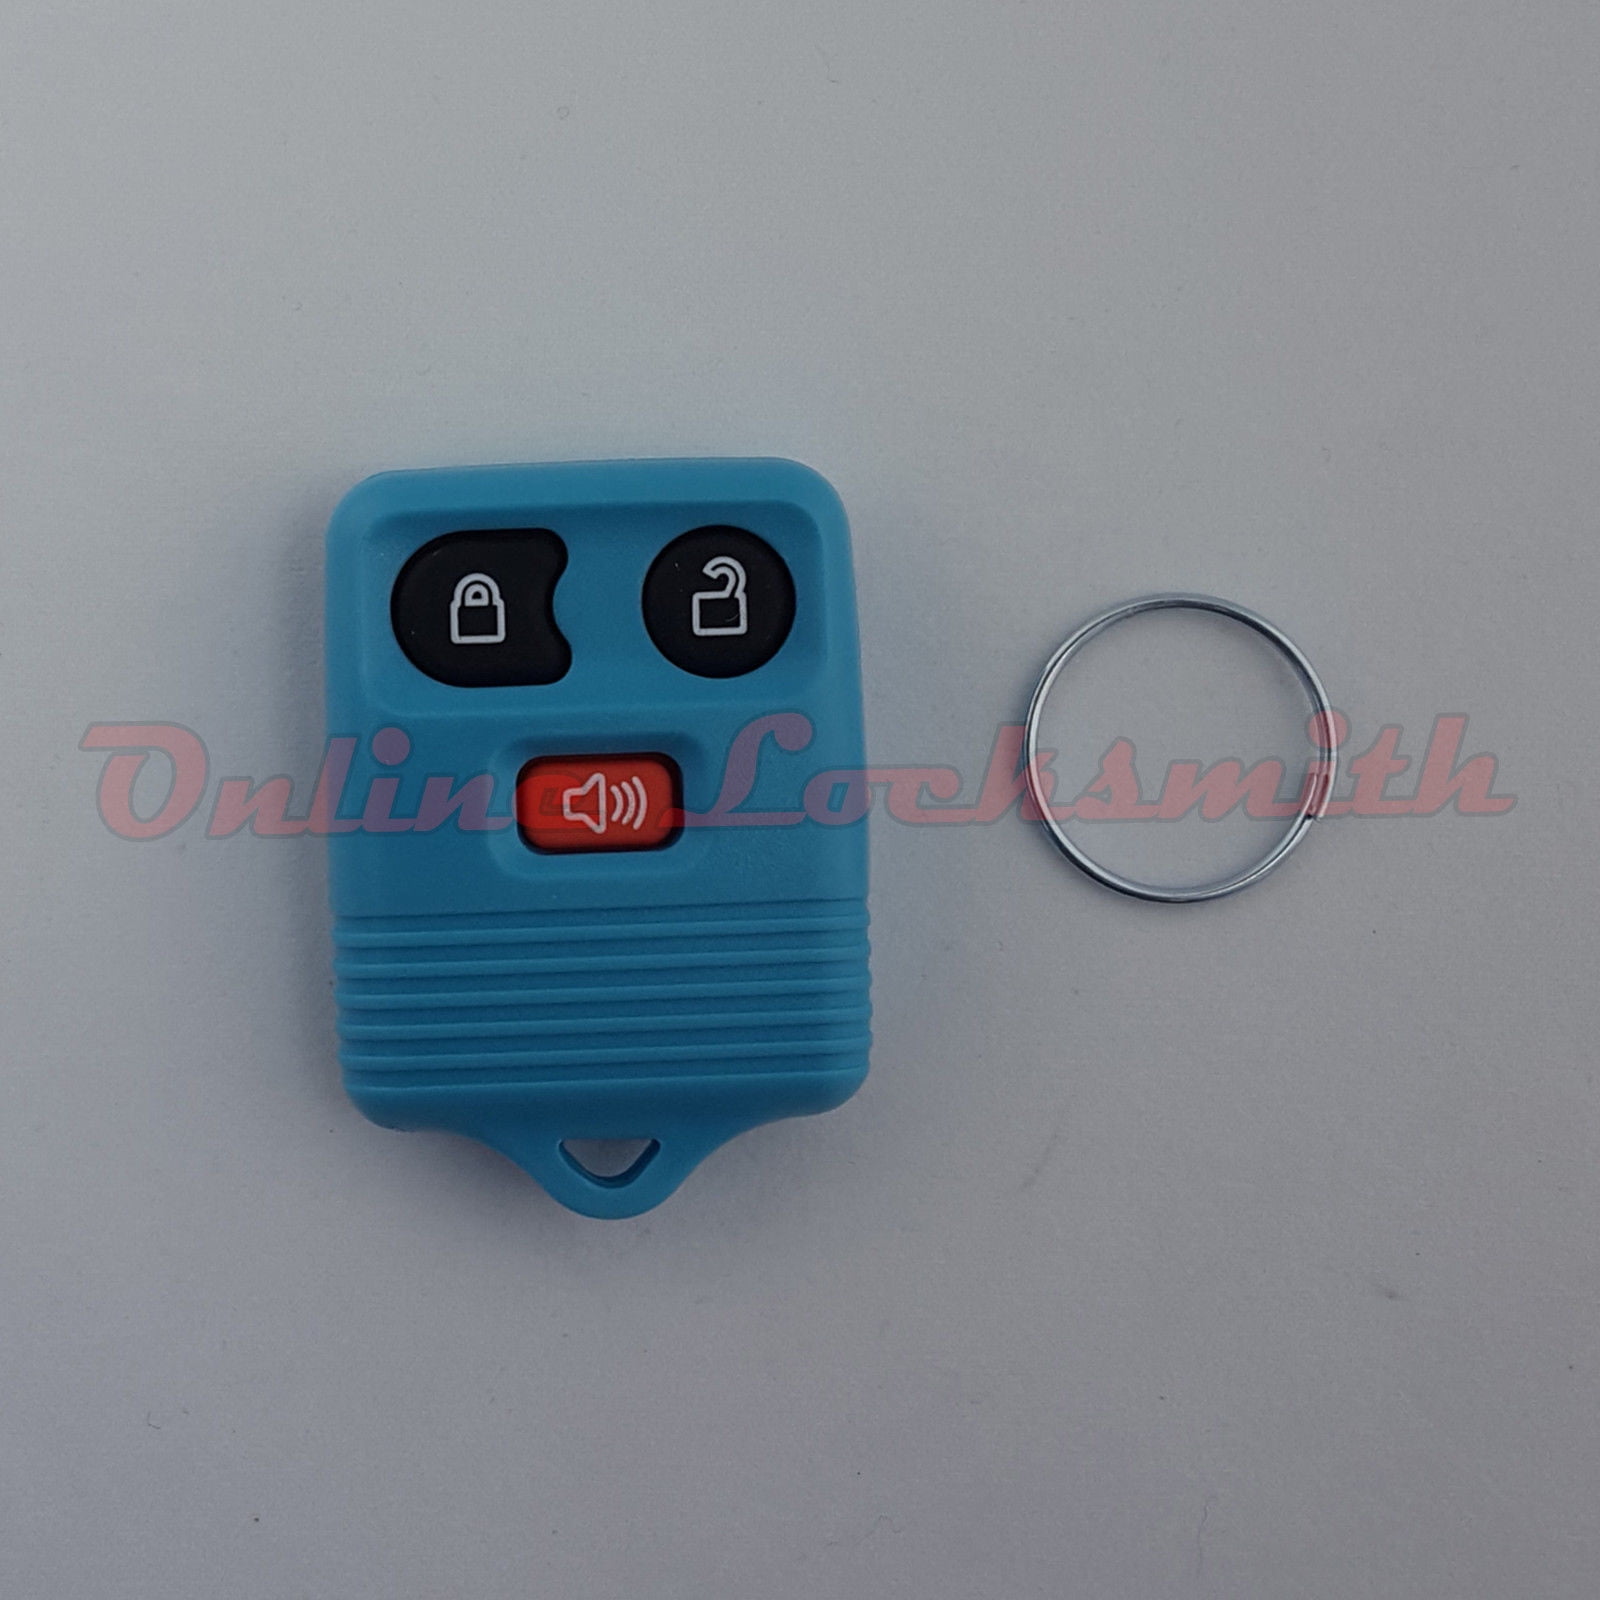 NEW Keyless Entry Key Fob Remote For a 2007 Ford Ranger 3 Button DIY Programming